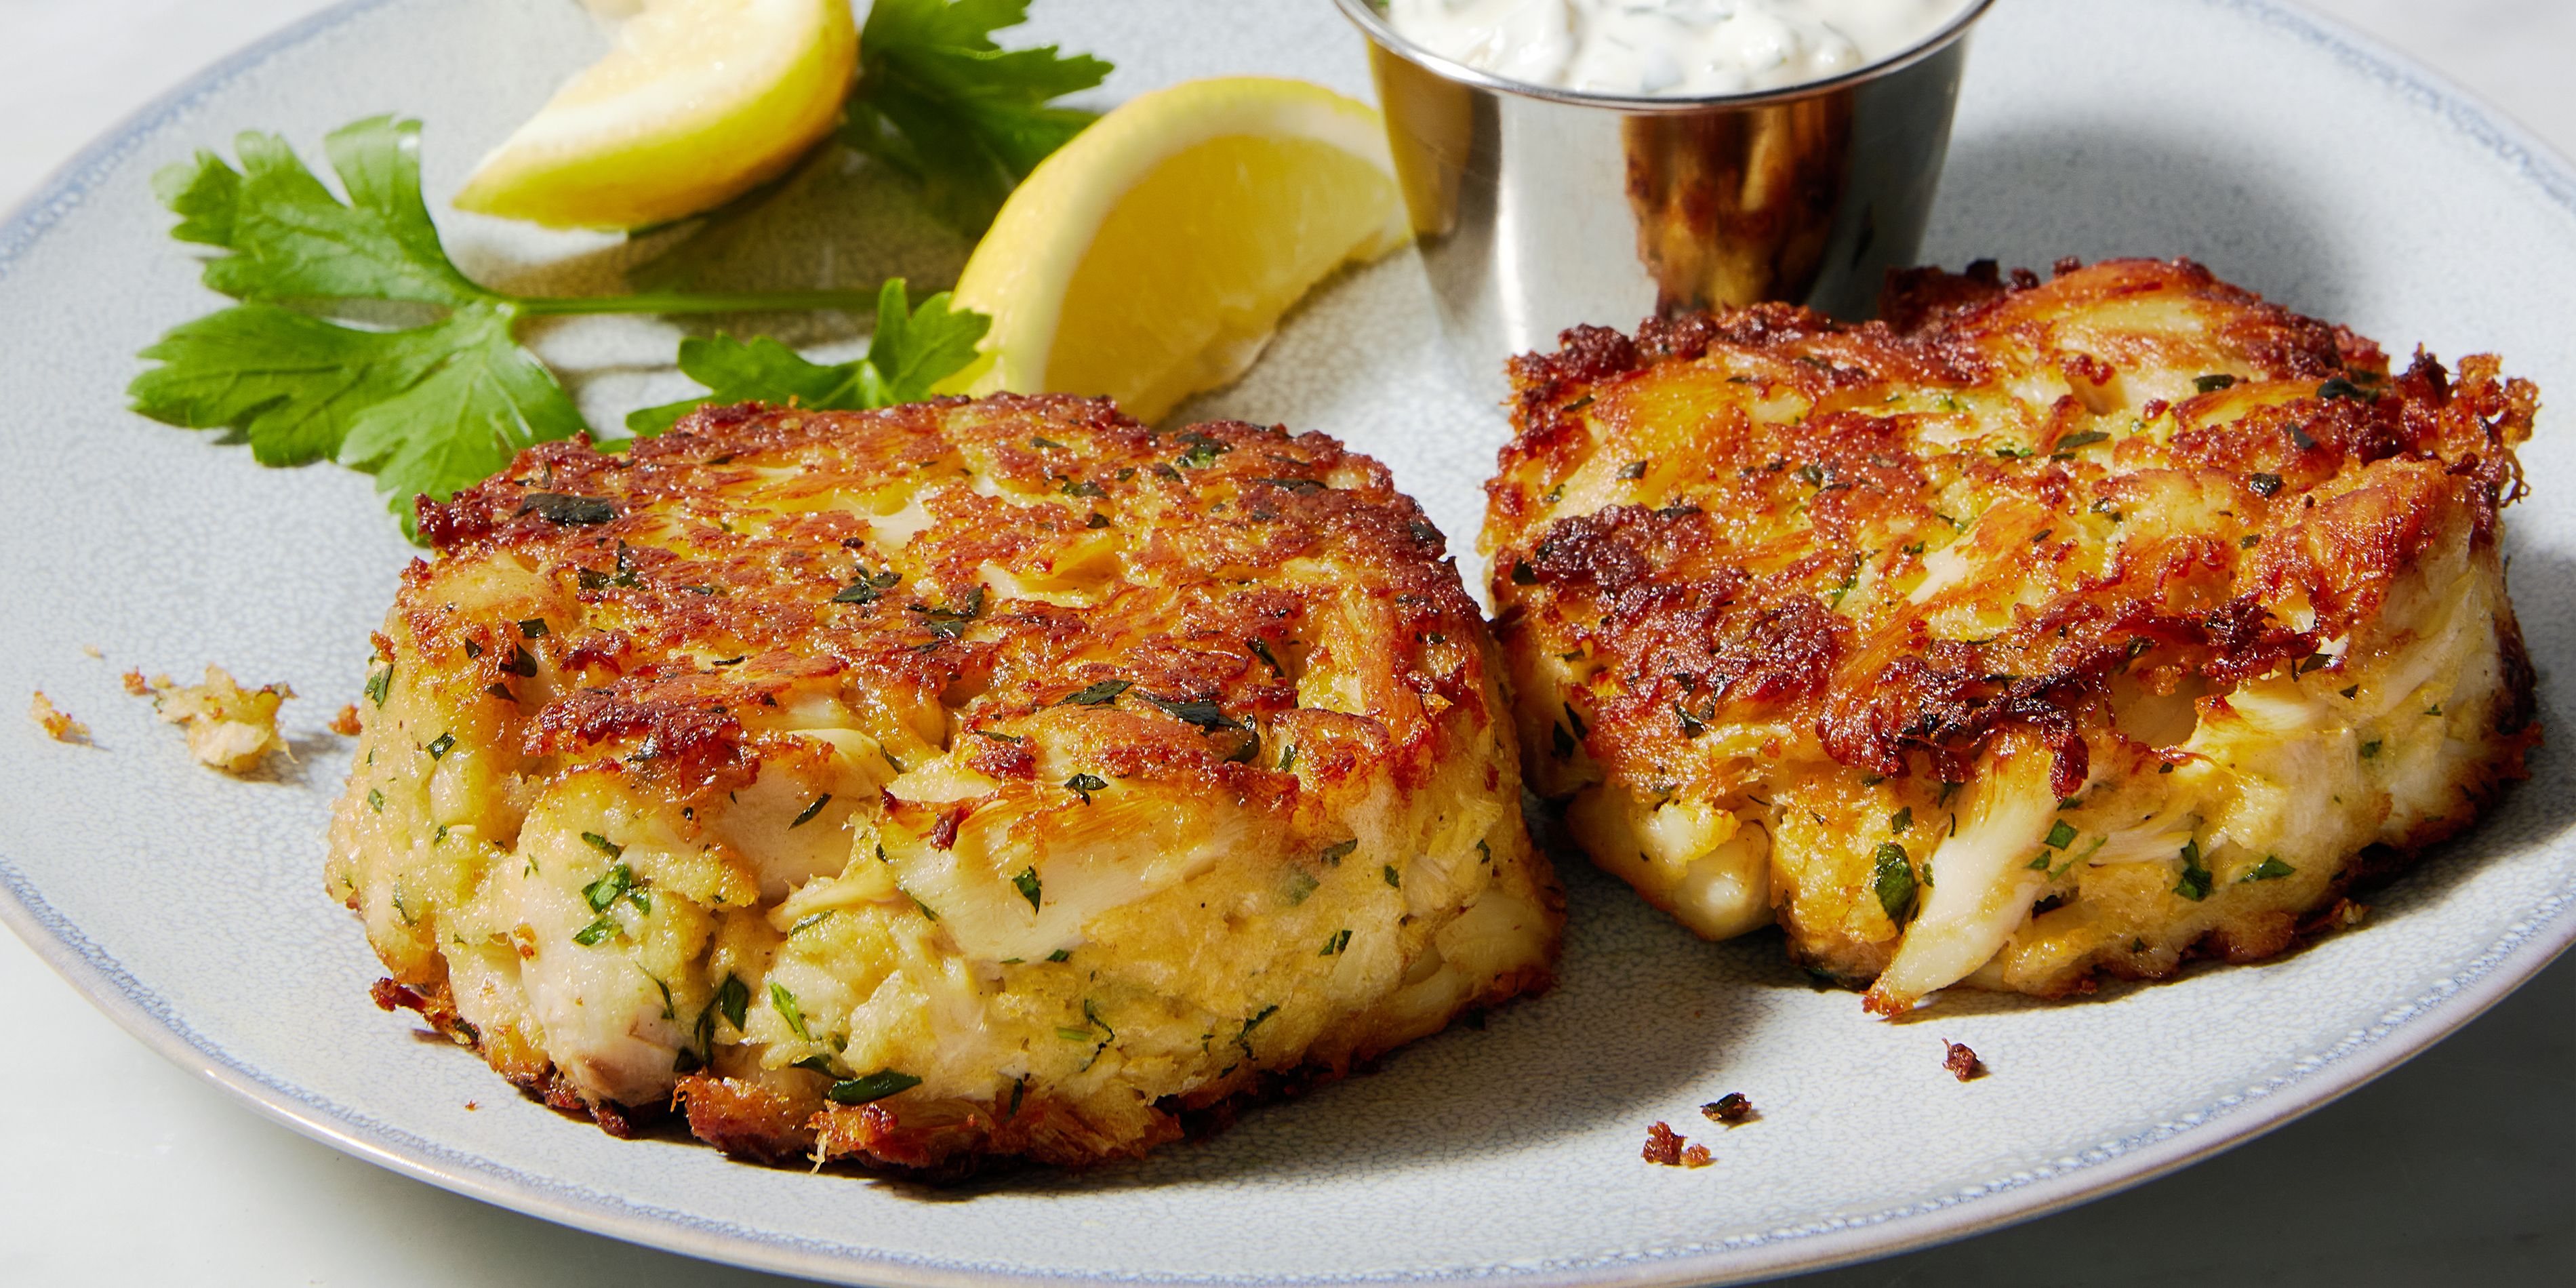 Baked Corn and Crab Cakes (Oven or Air Fryer!) - Skinnytaste